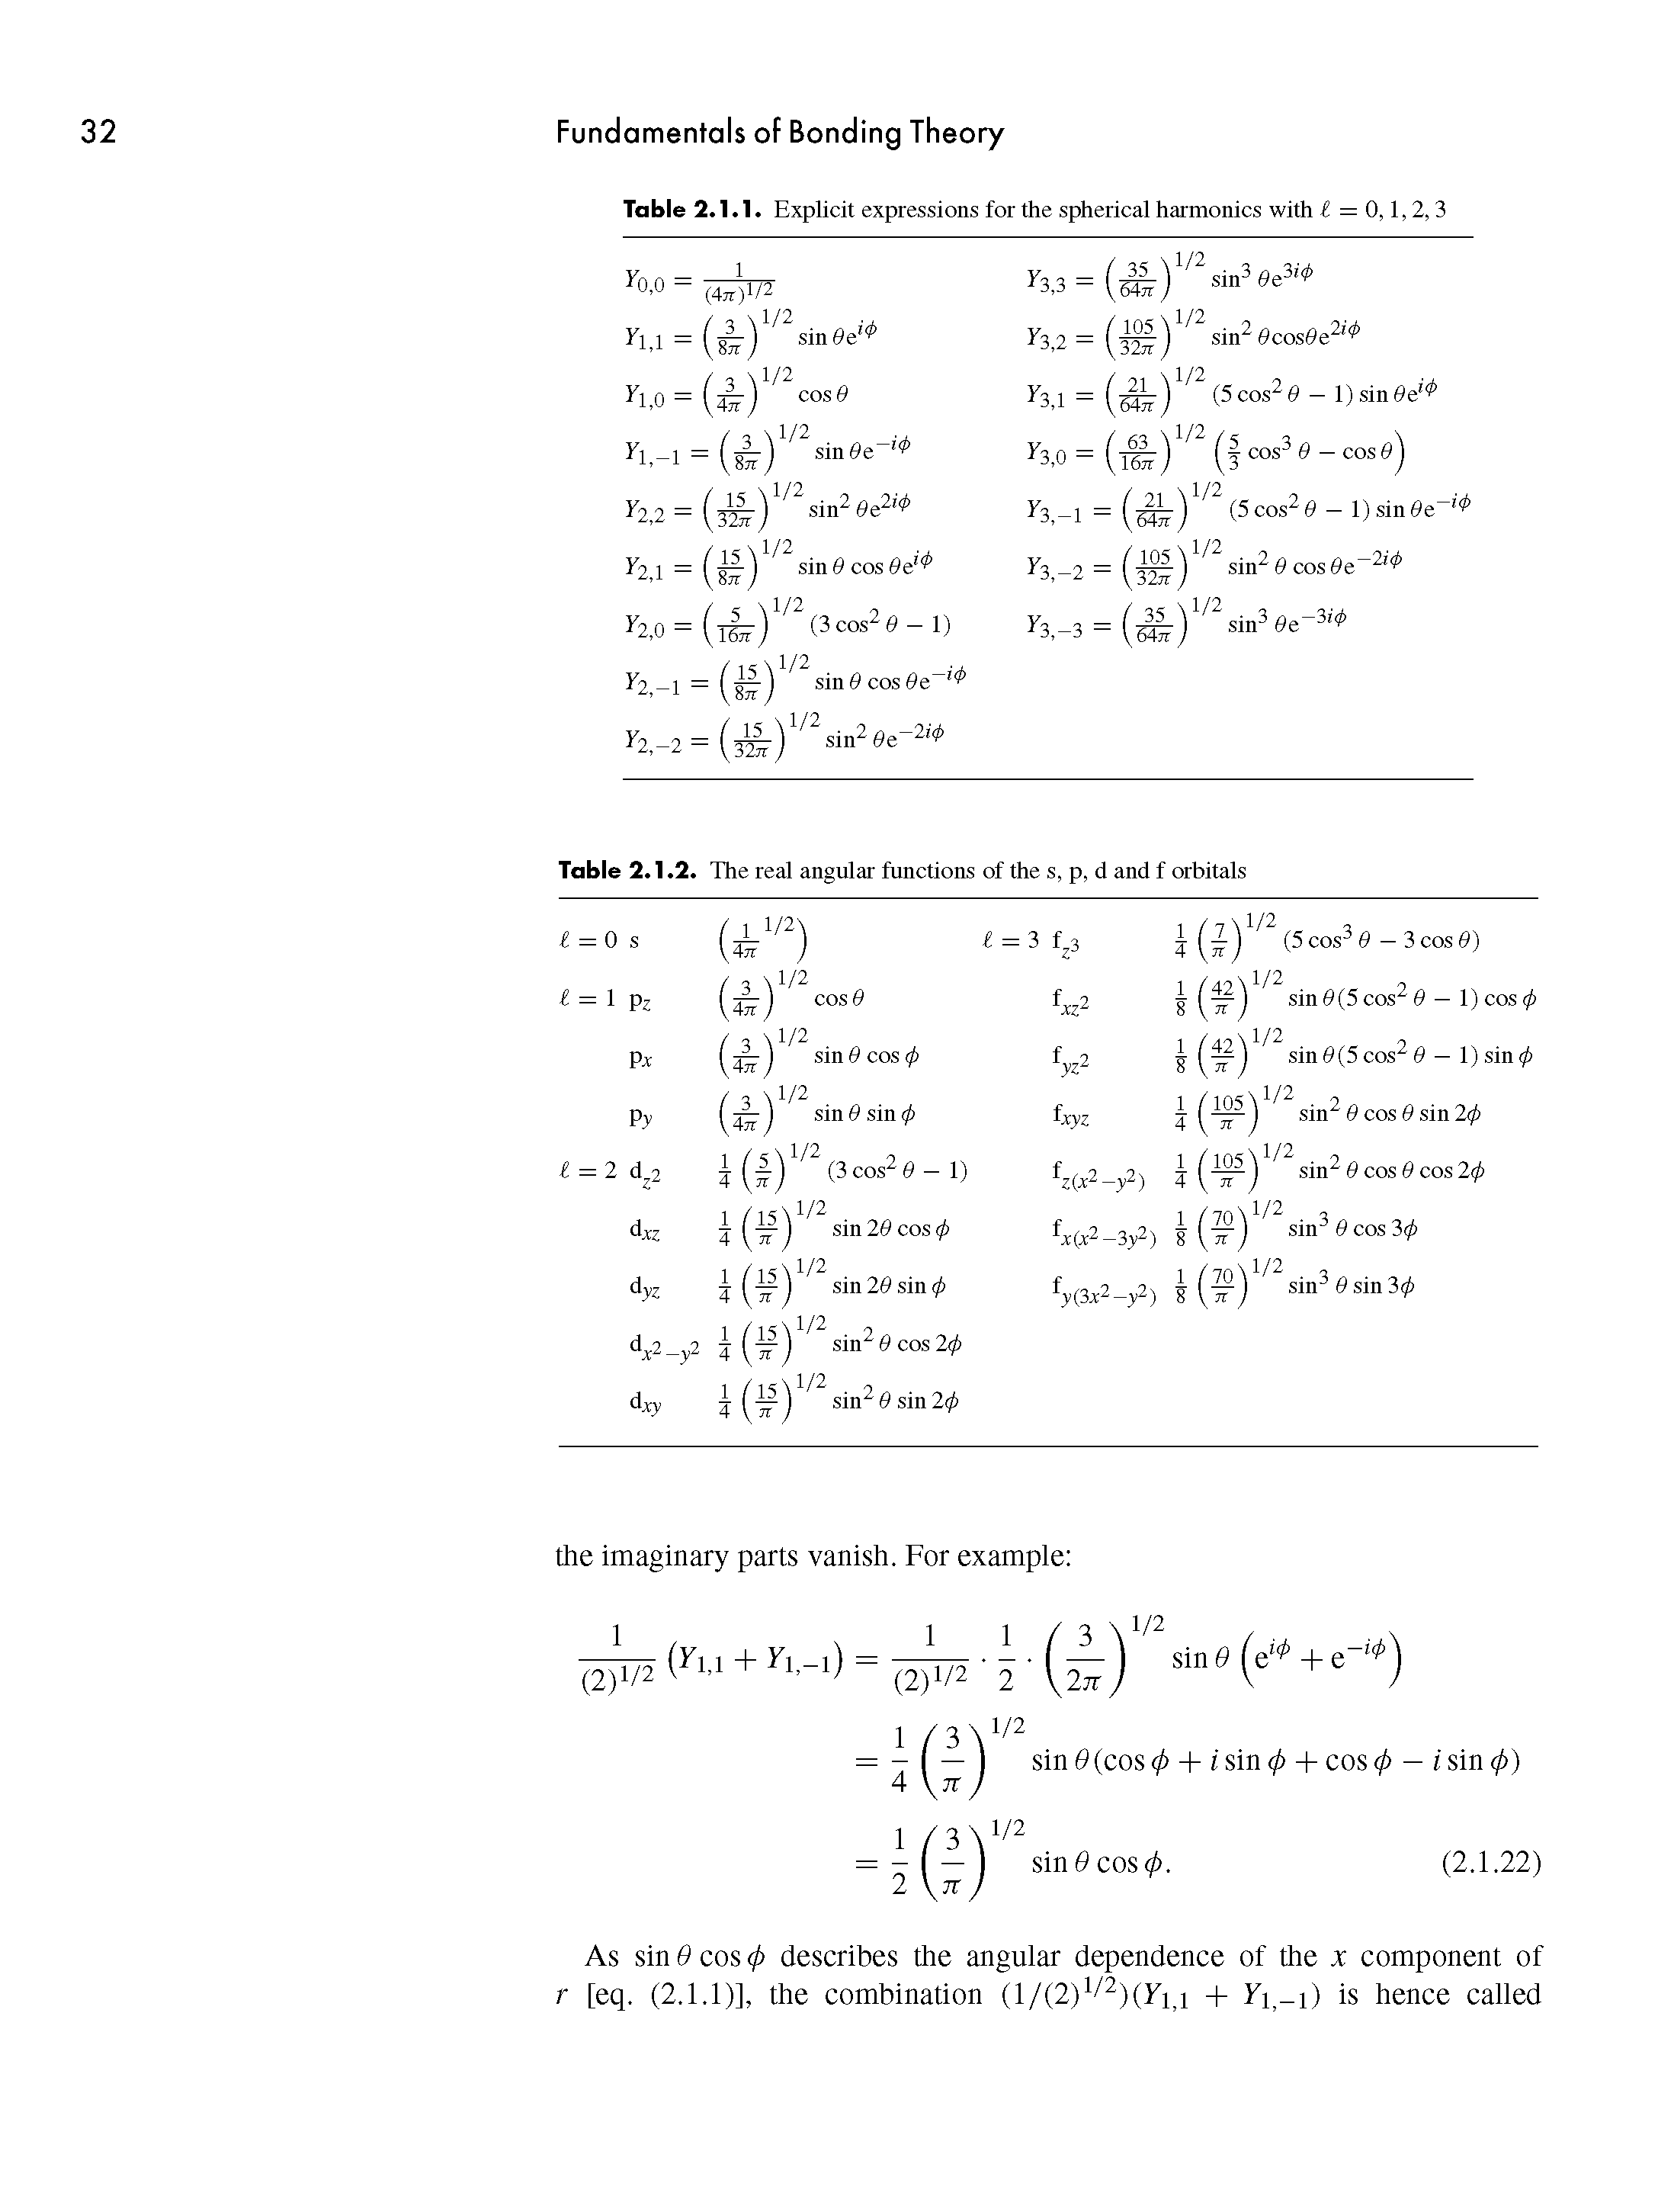 Table 2.1.1. Explicit expressions for the spherical harmonics with i = 0,1,2,3...